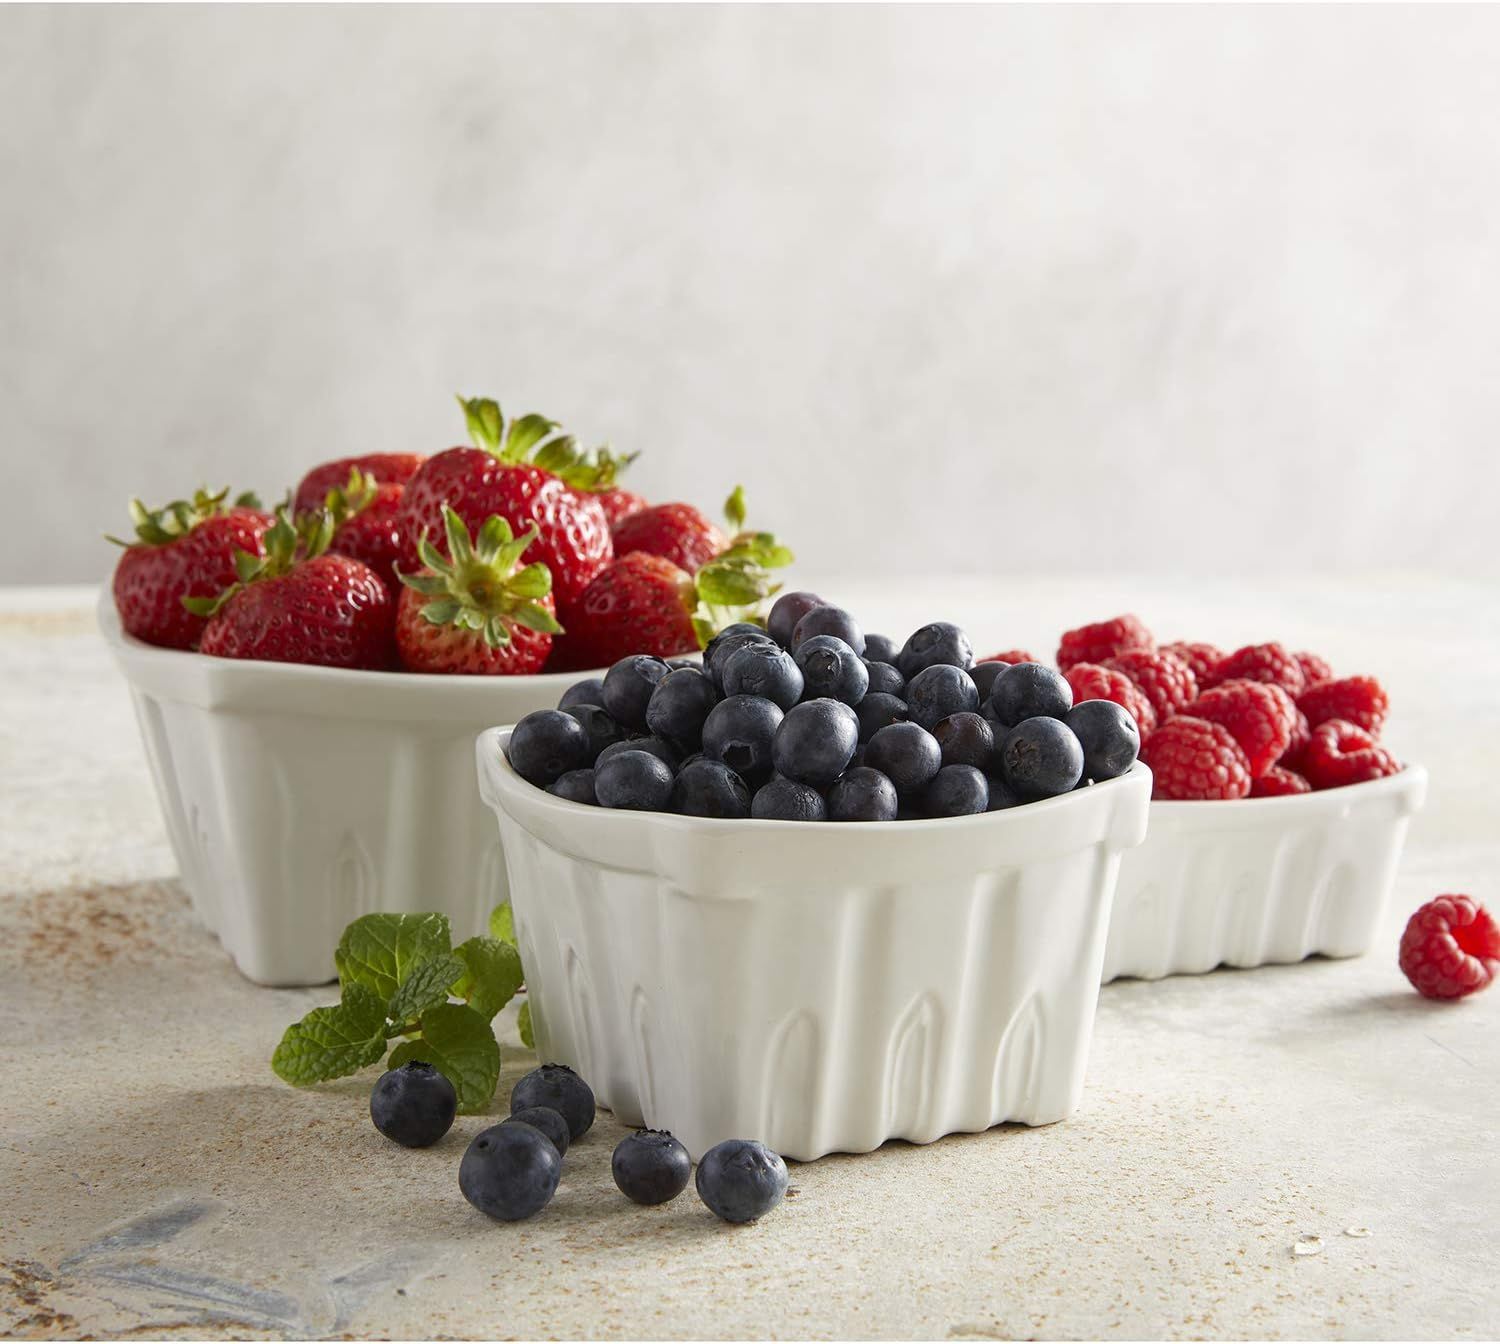 Creative Brands 47th & Main Porcelain Berry Basket, Small, White | Amazon (US)